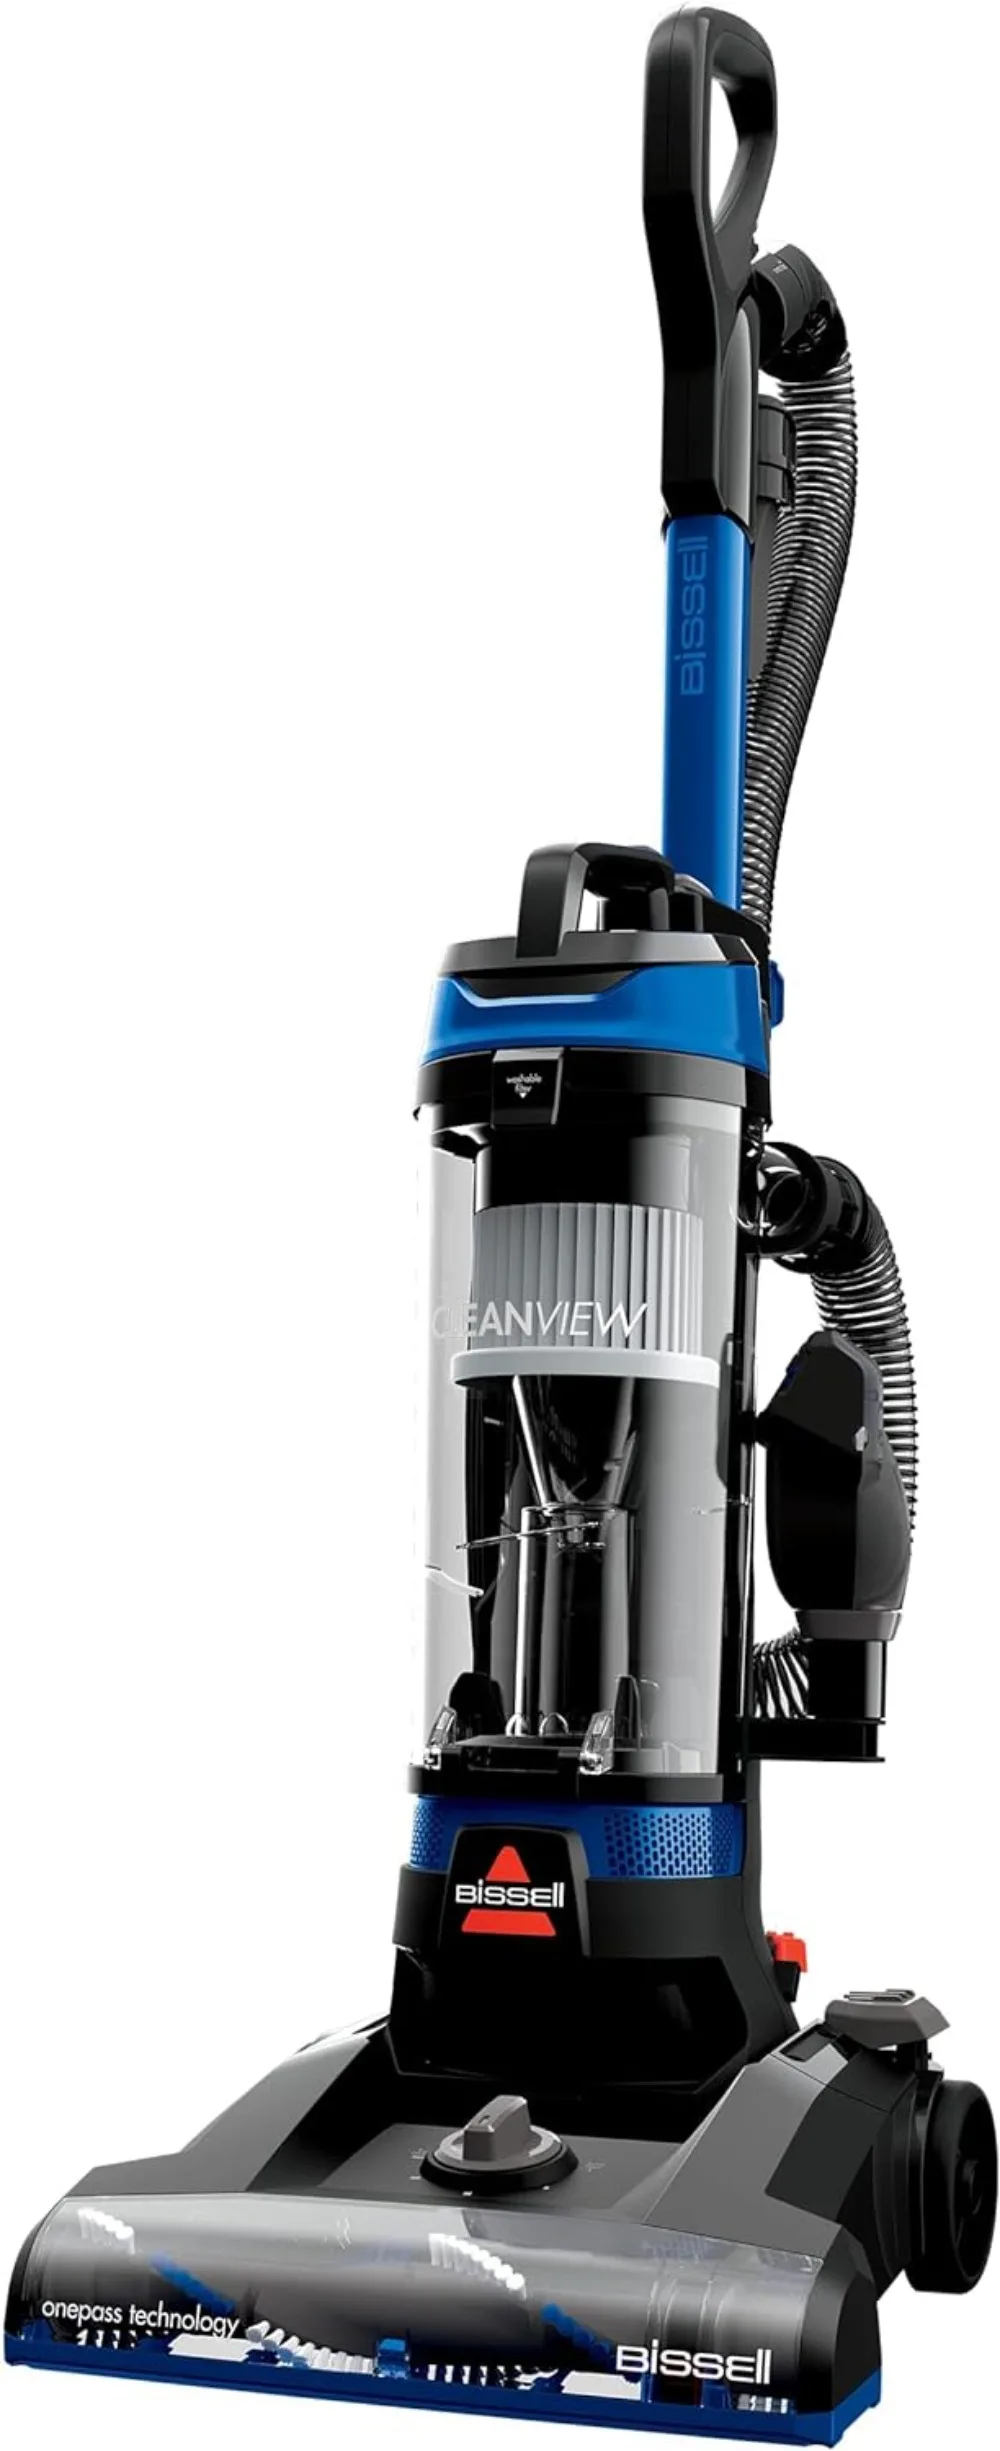 

BISSELL CleanView Upright Bagless Vacuum Cleaner with Active Wand, 3536,Black/Cobalt Blue